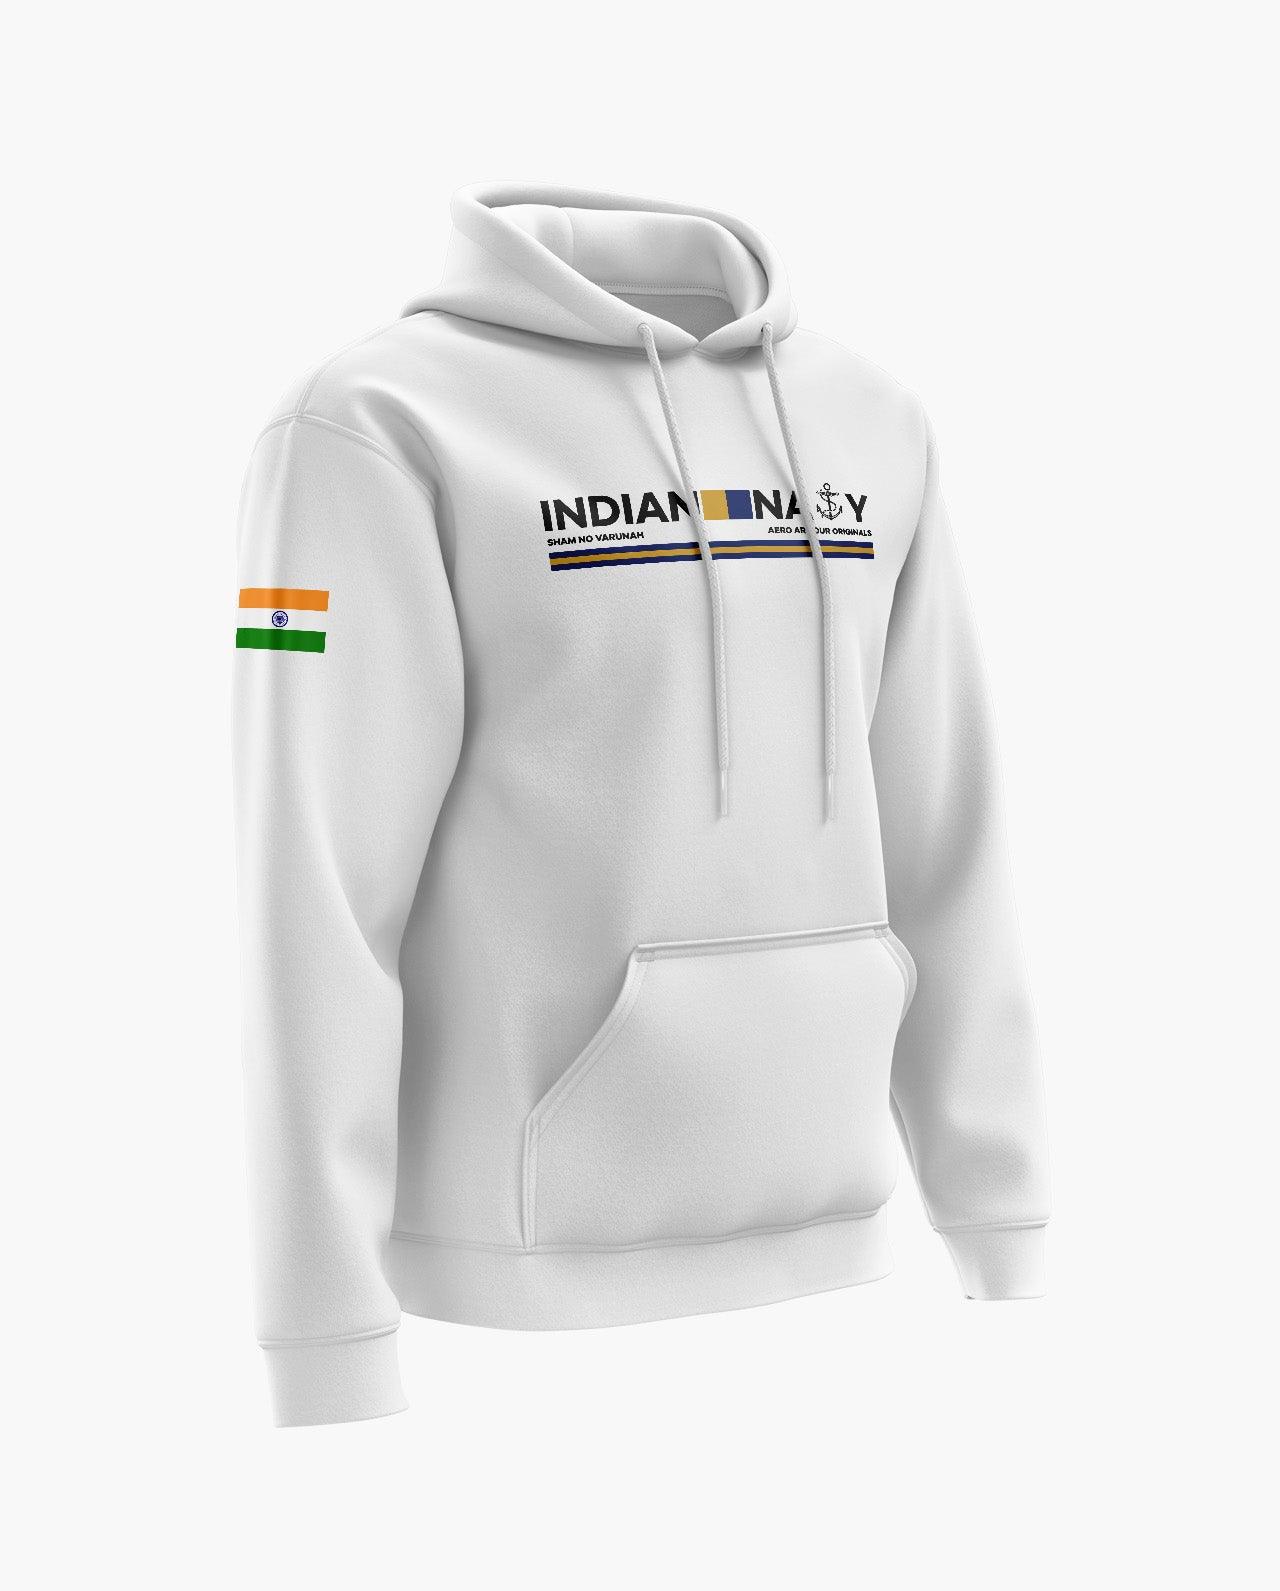 Indian Navy Admiral Hoodie - Aero Armour